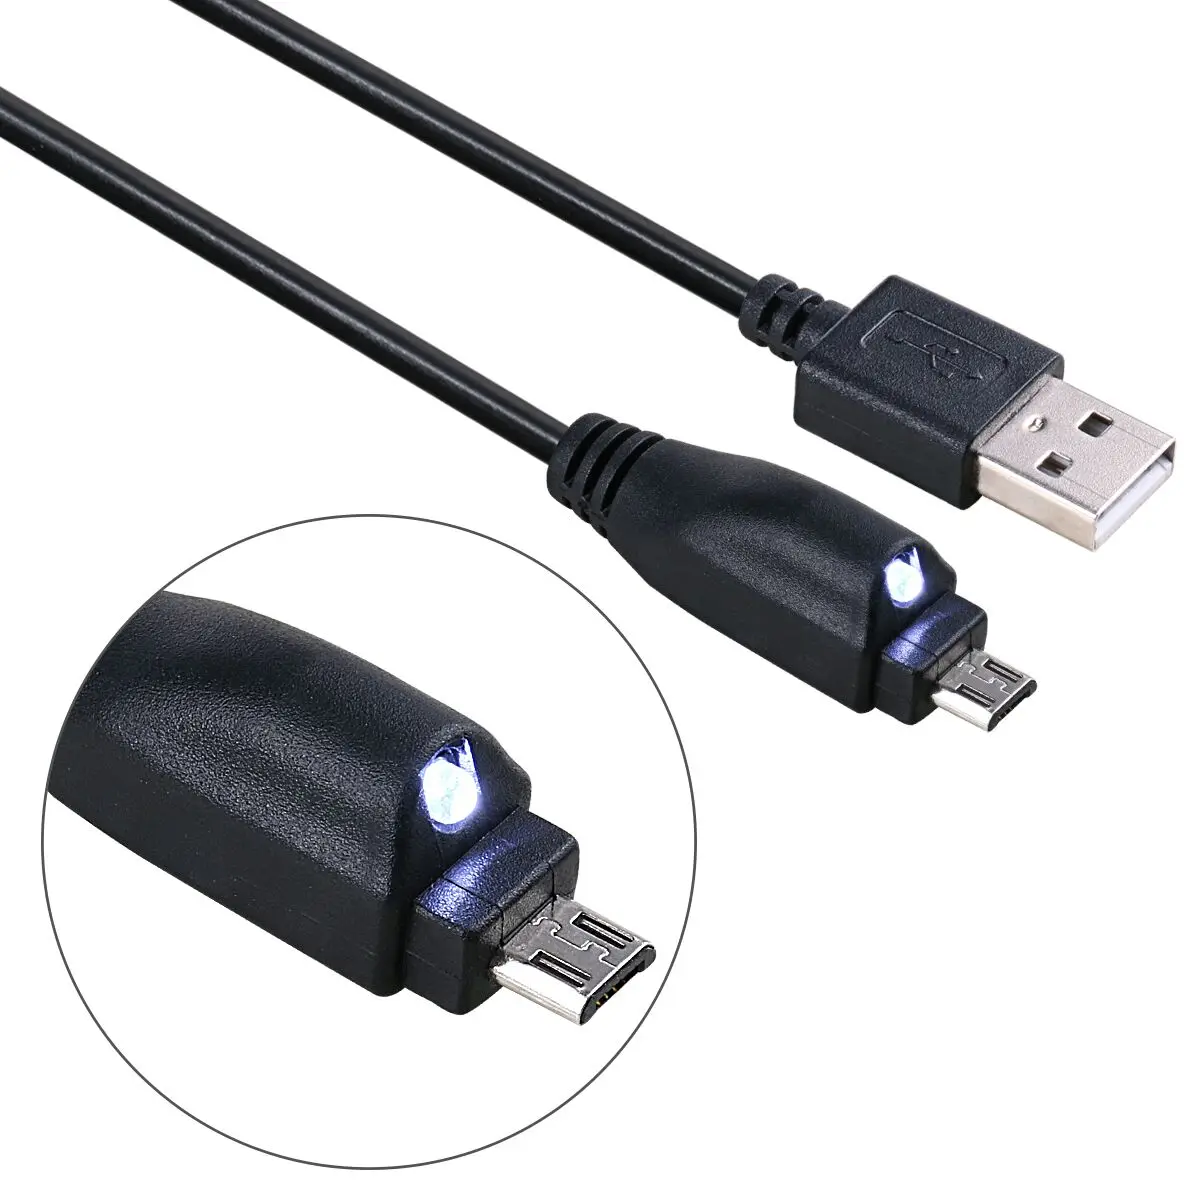 Charger Cable USB 3.0 3.1 USB A Male to Type C Cable Fast Charger wire for mobile phone notebook 27